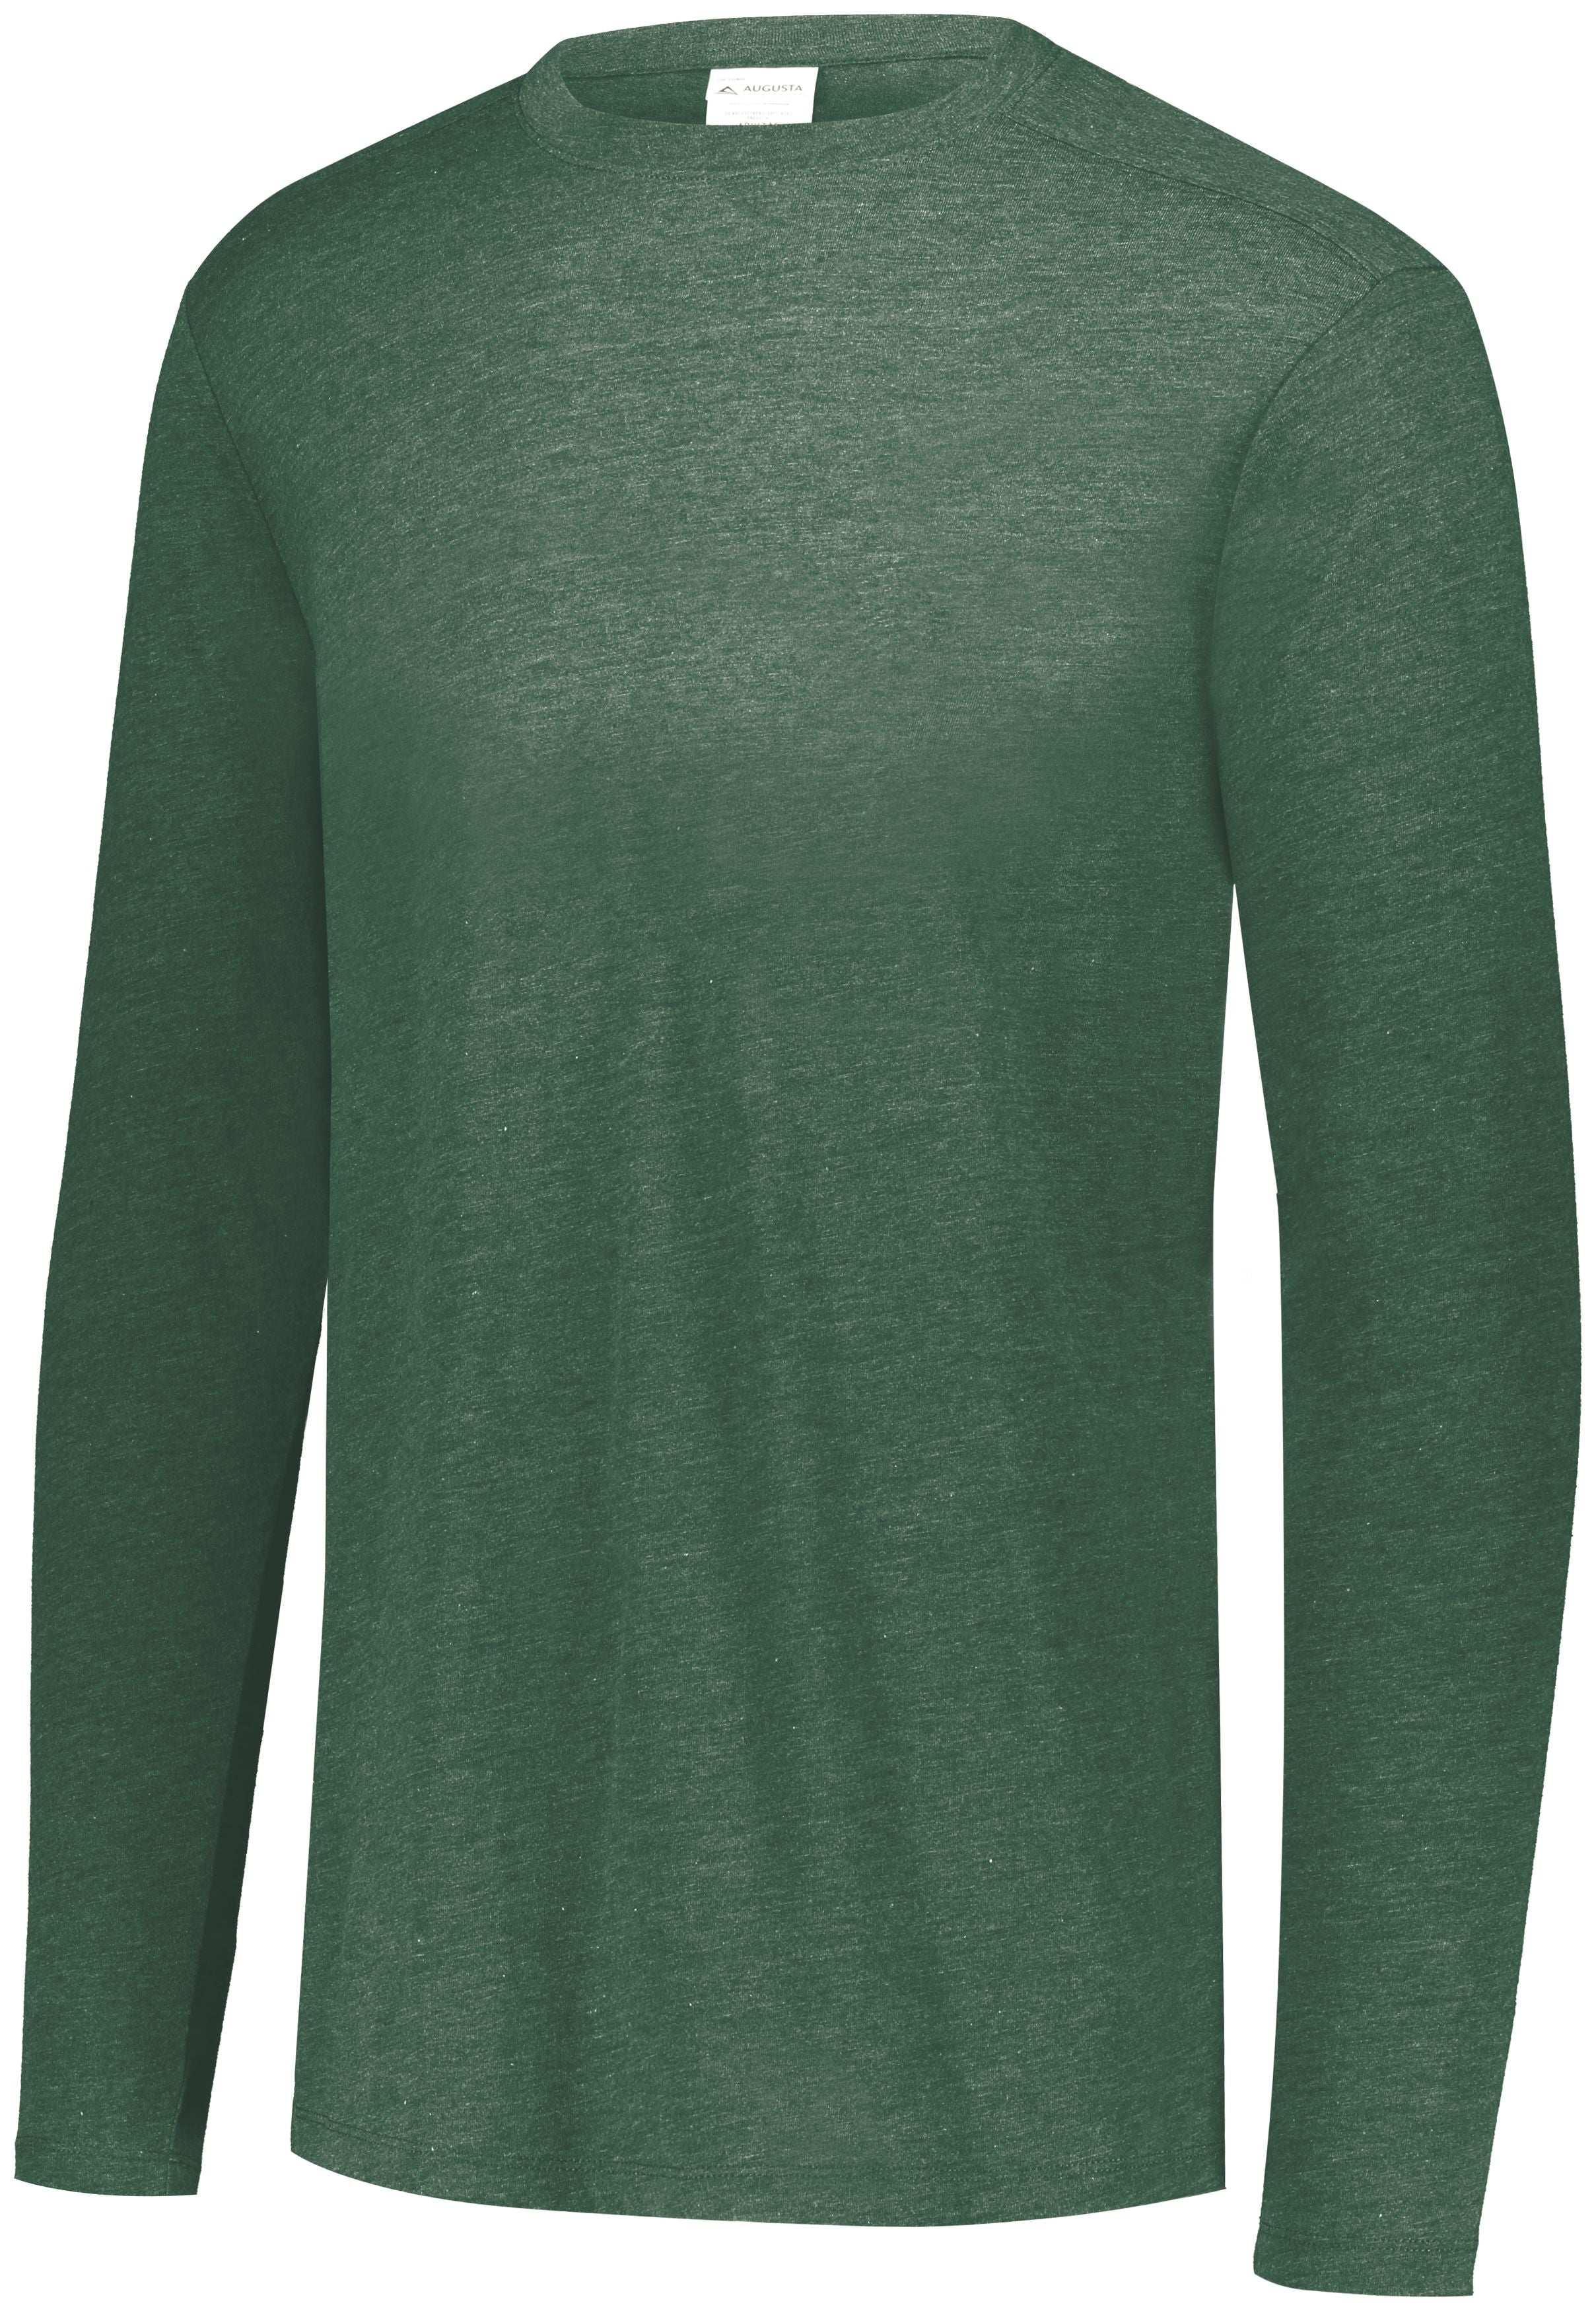 Augusta Sportswear Tri-Blend Long Sleeve Crew in Dark Green Heather  -Part of the Adult, Augusta-Products, Shirts product lines at KanaleyCreations.com